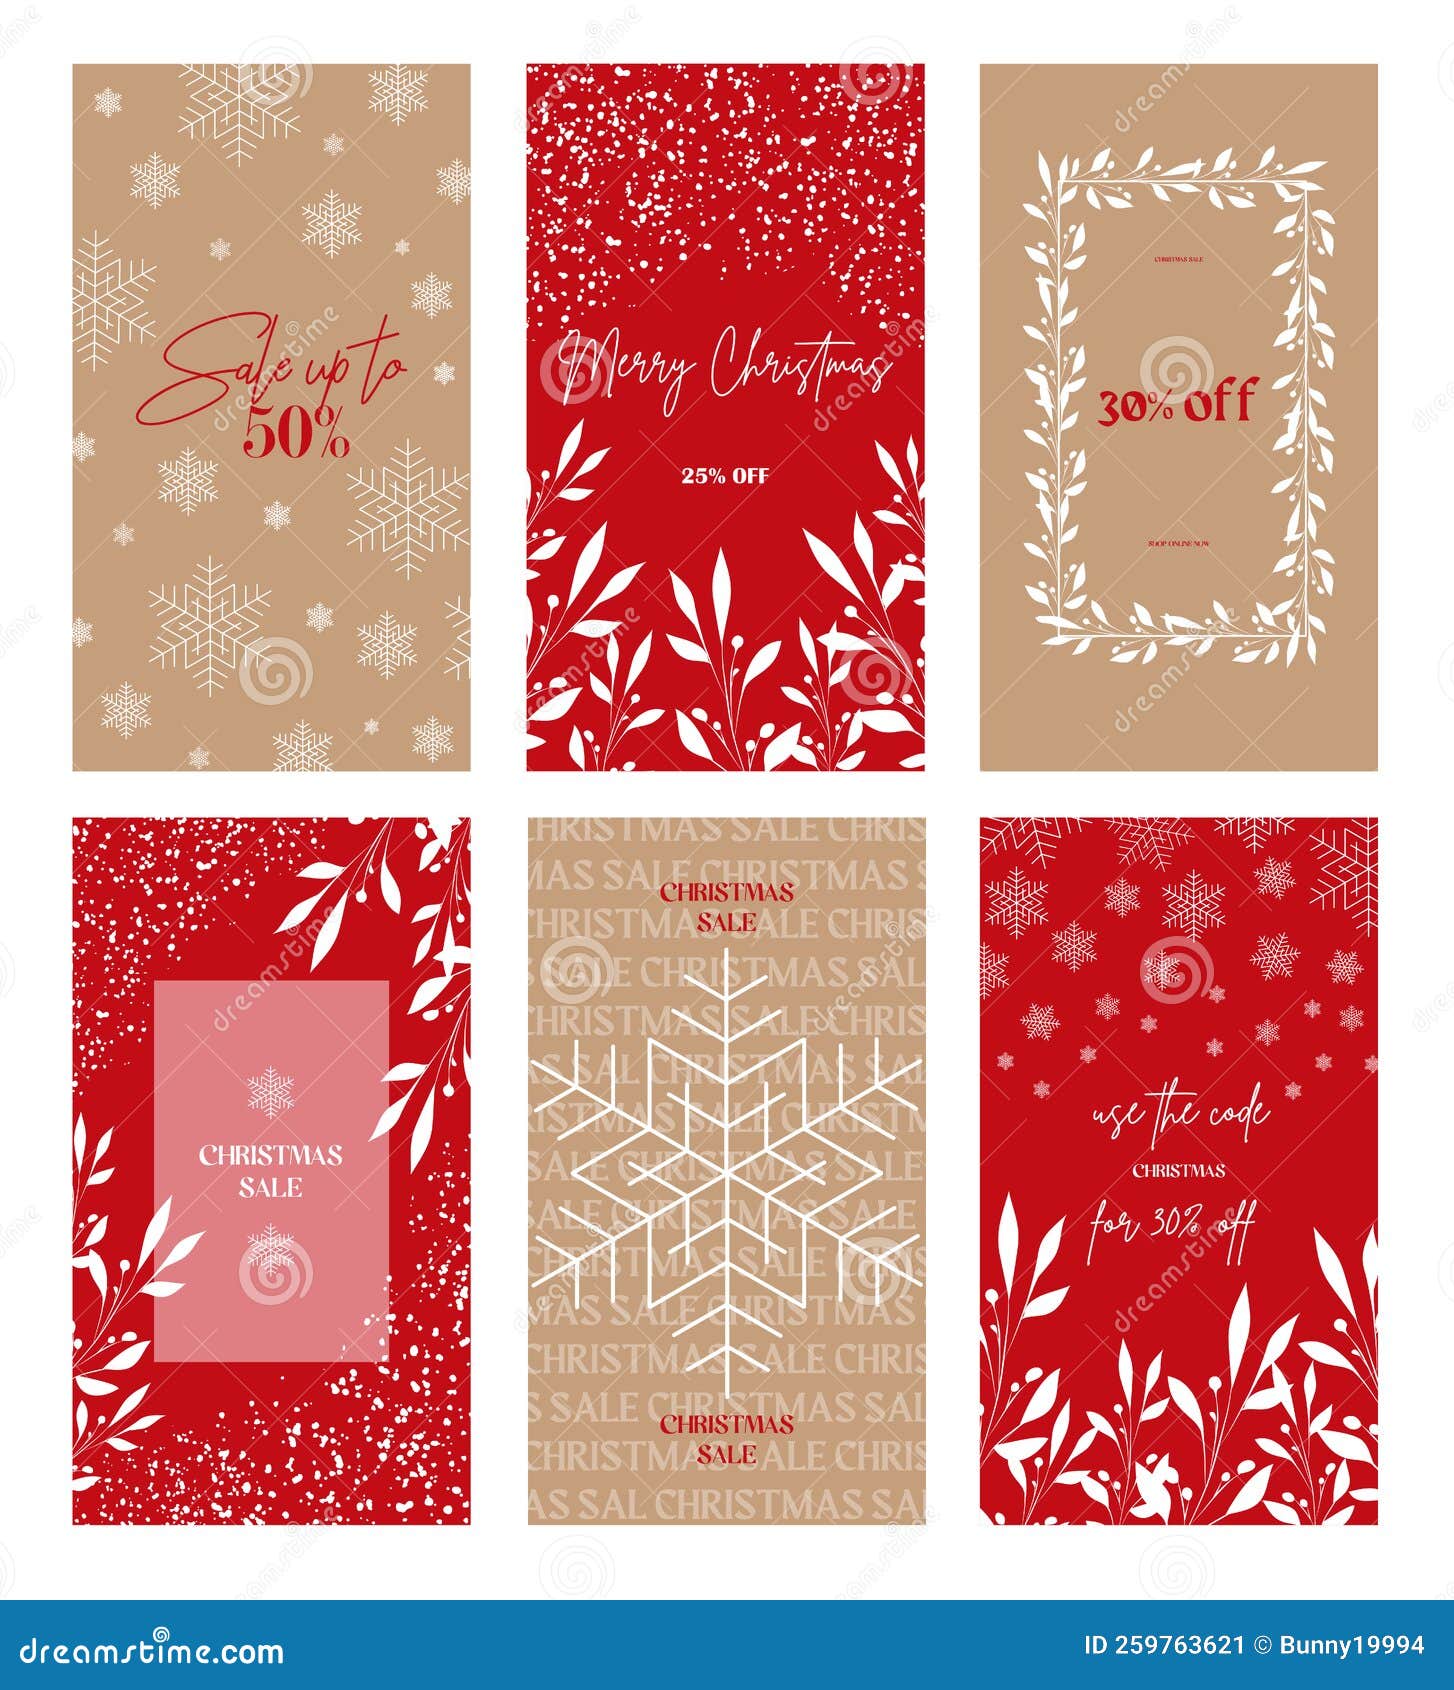 Christmas Instagram Post Stories templates pack. Merry Christmas greeting card posts, social media templates